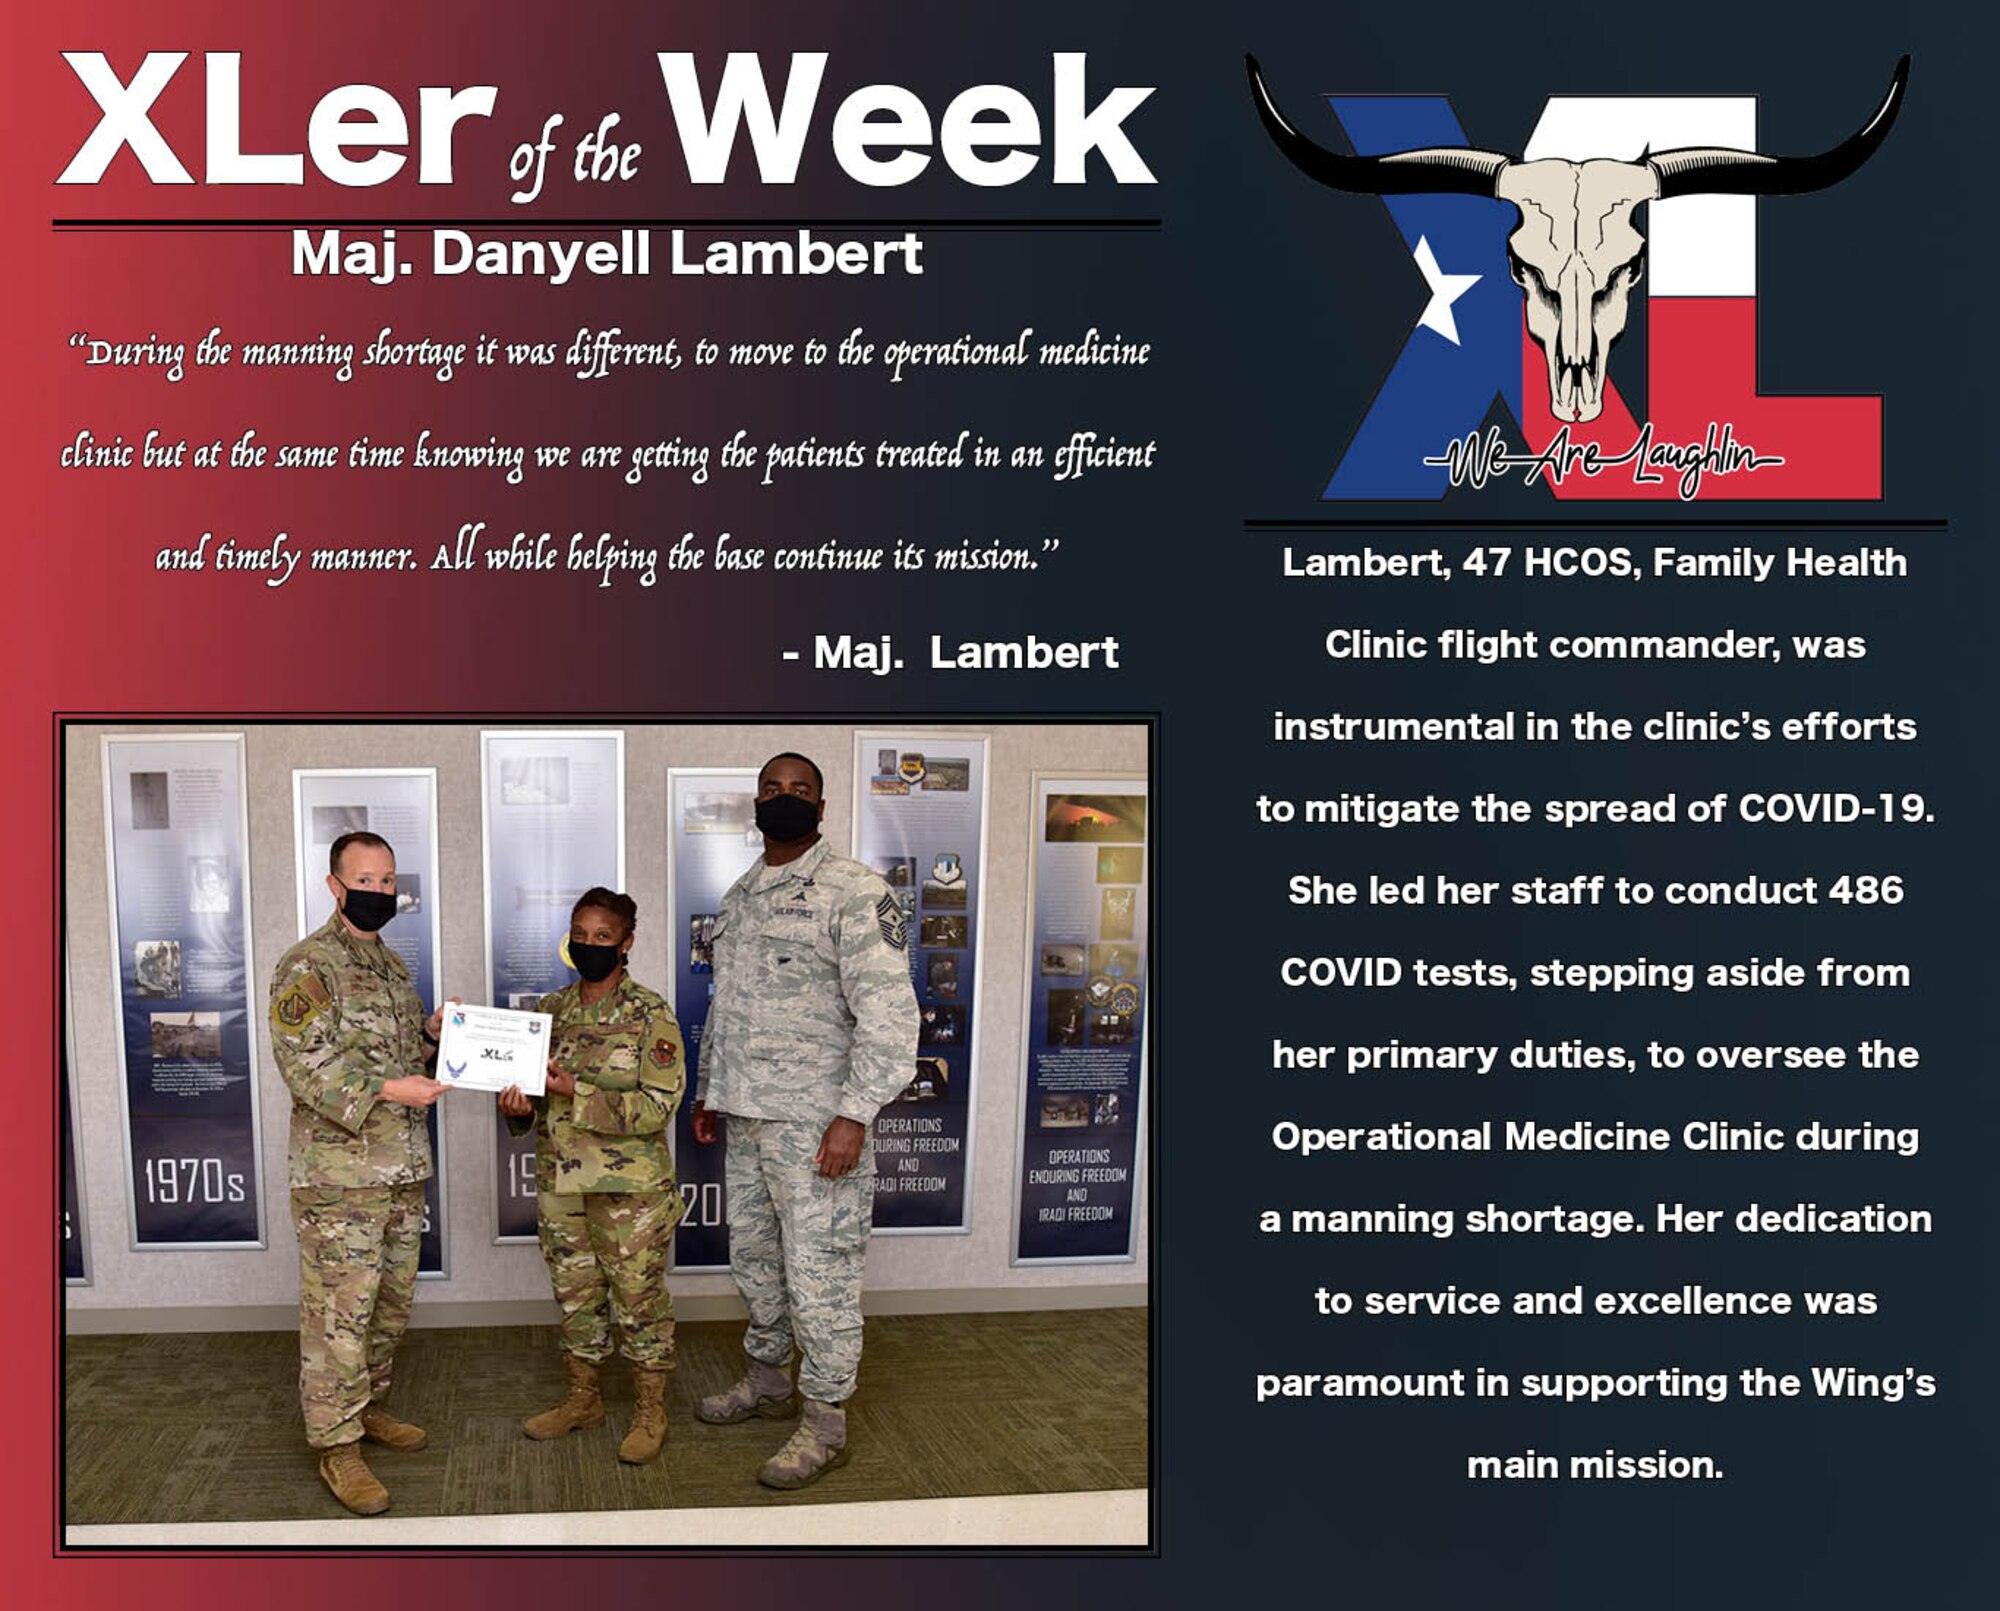 Maj. Danyell Lambert, 47th Healthcare Support Squadron health clinic flight commander, was chosen by wing leadership to be the “XLer of the Week”, the week of August 17, 2020, at Laughlin Air Force Base, Texas. The “XLer” award, presented by Col. Craig Prather, 47th Flying Training Wing commander, and Chief Master Sgt. Robert L. Zackery III, 47th FTW command chief master sergeant, is given to those who consistently make outstanding contributions to their unit and the Laughlin mission. (U.S. Air Force Graphic by Airman 1st Class David Phaff)